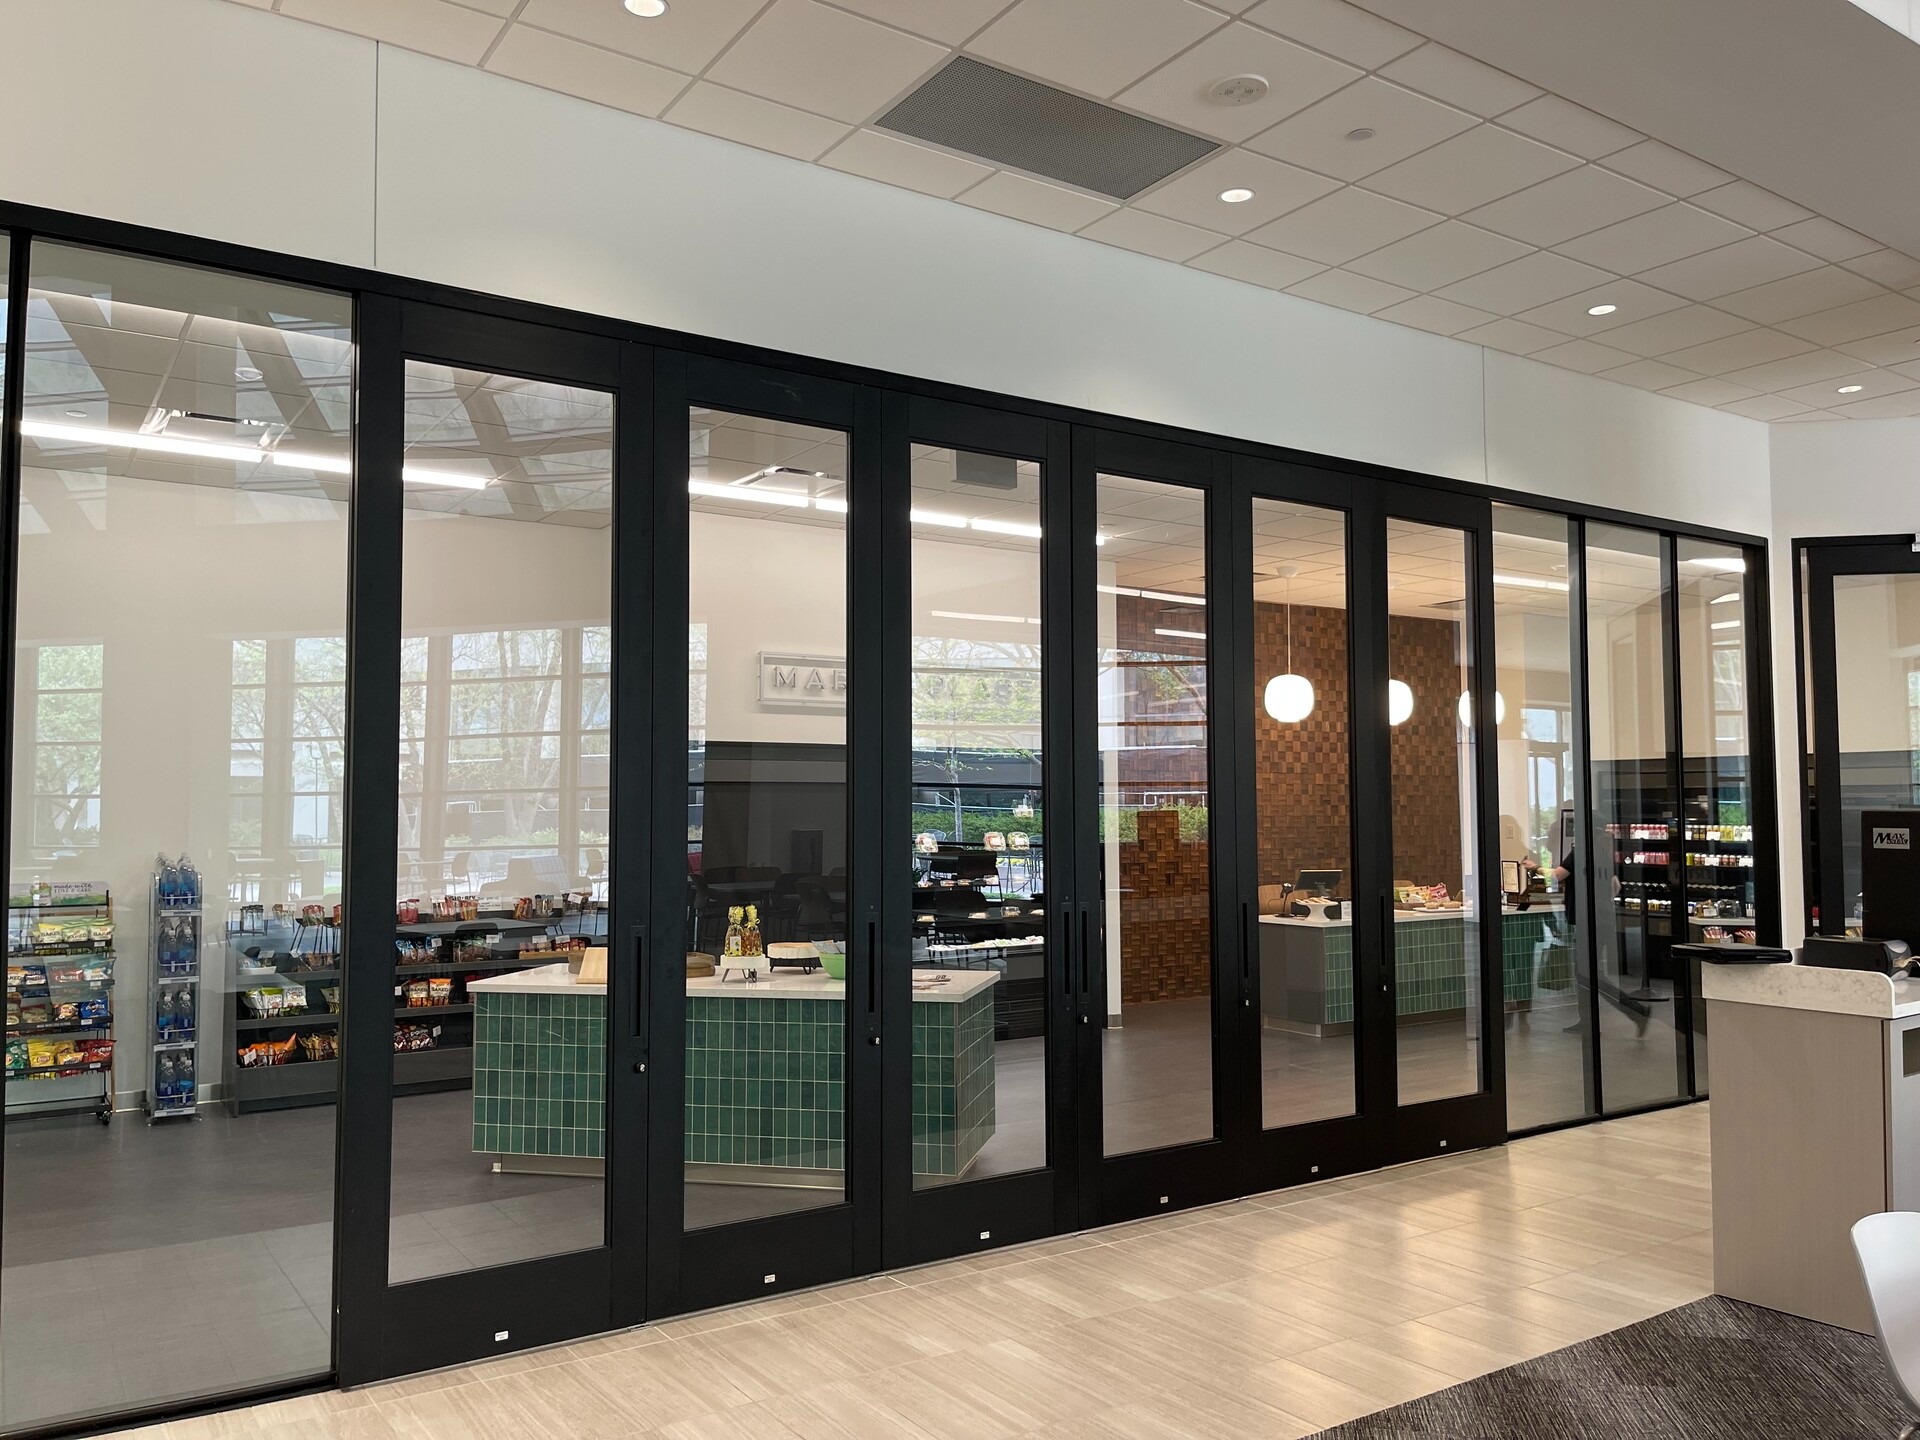 A sliding door system solution for a cafe in an office building.